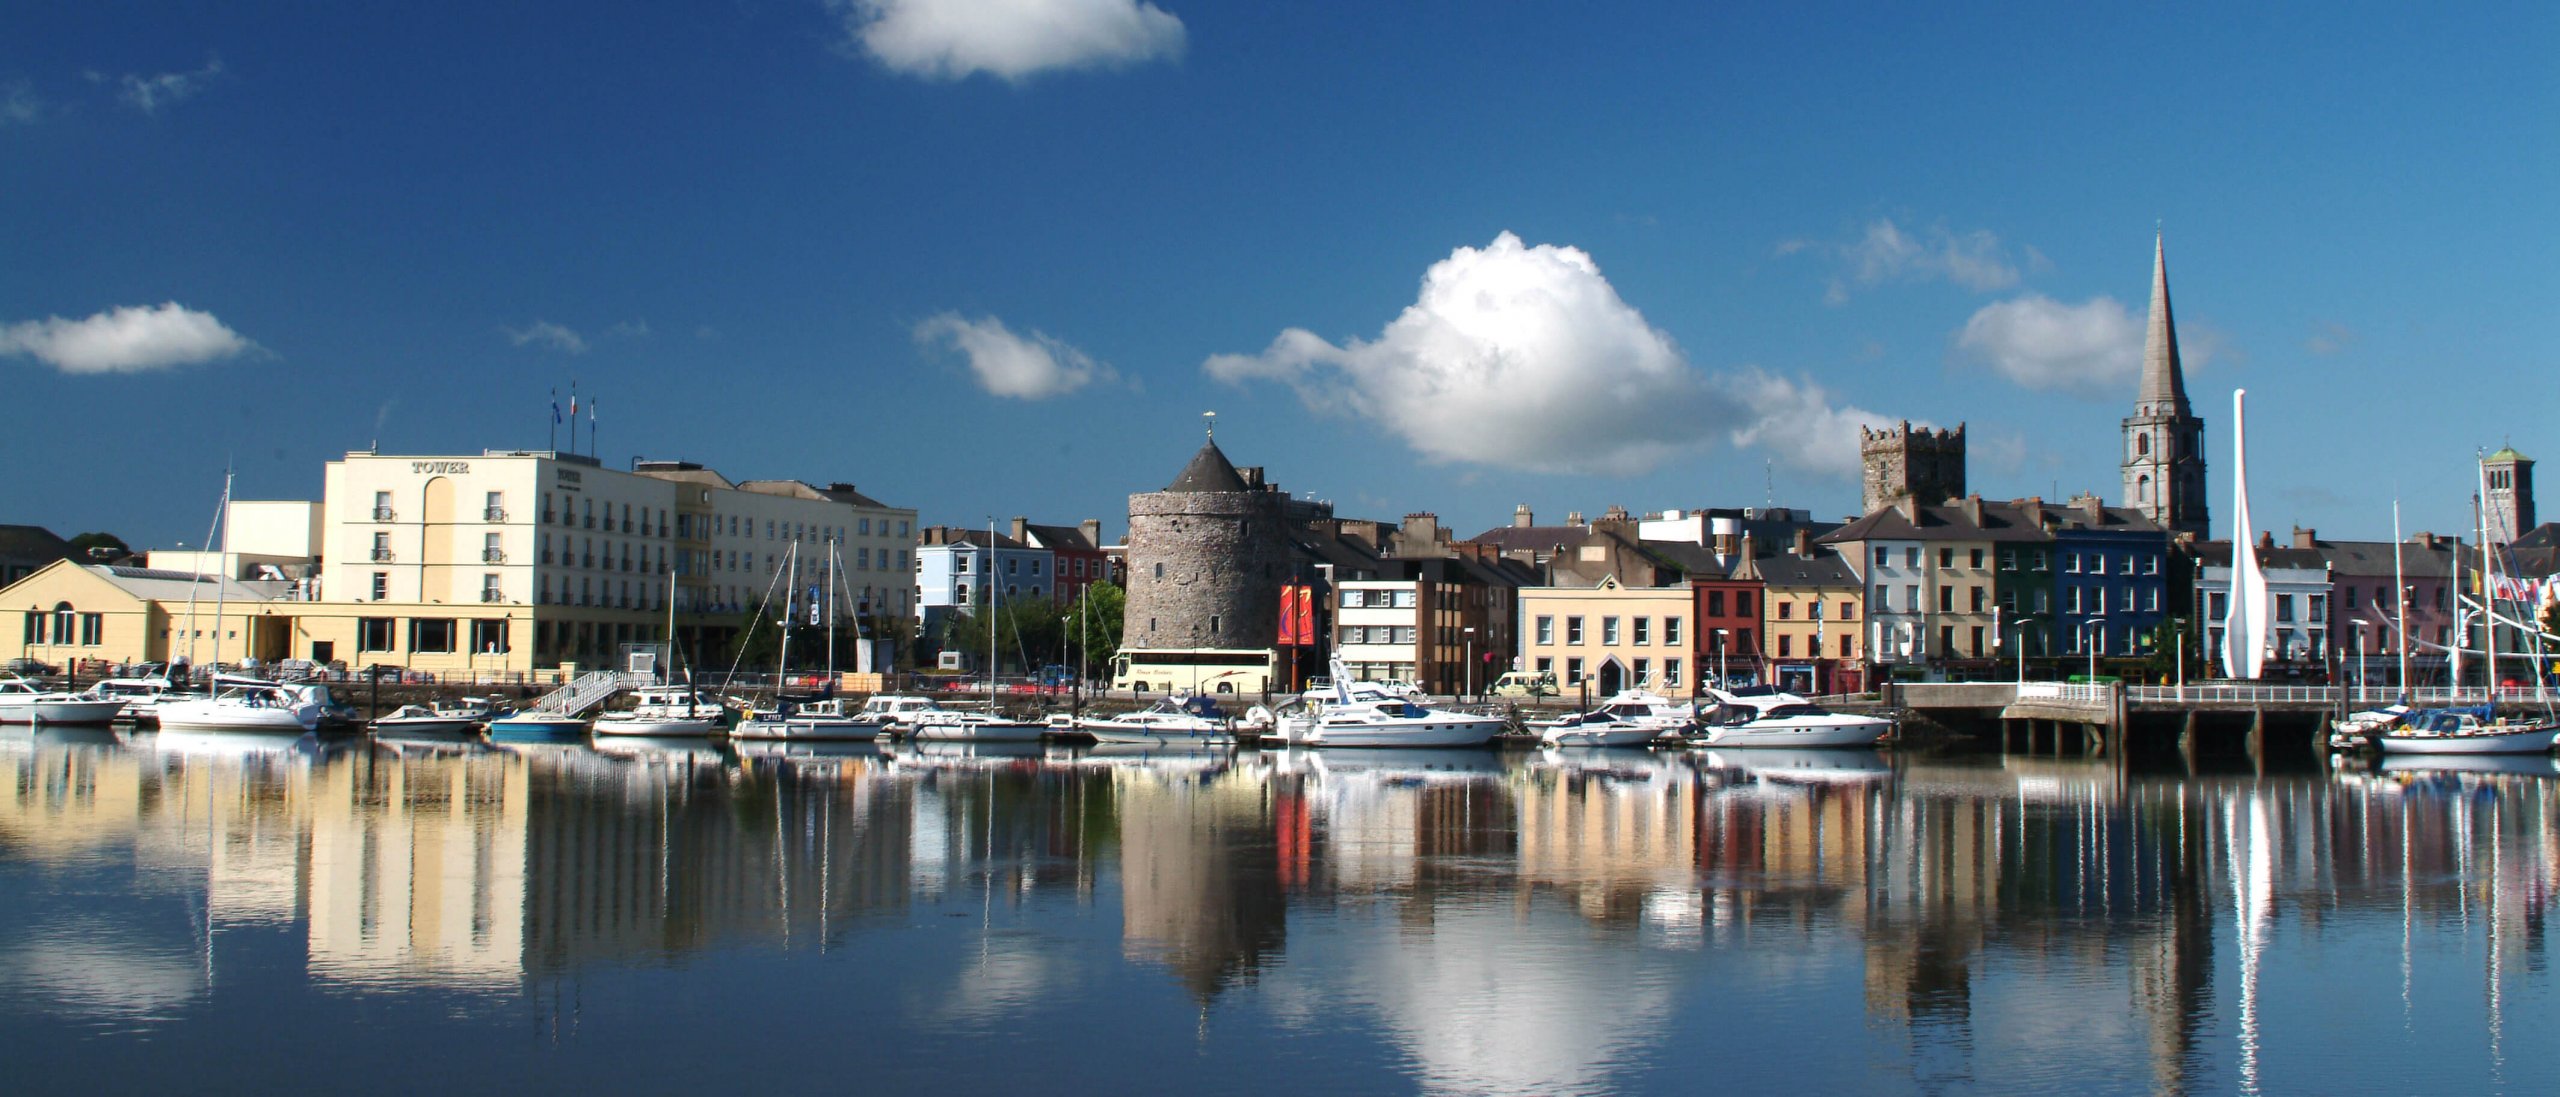 Waterford city quays in Ireland's Ancient East